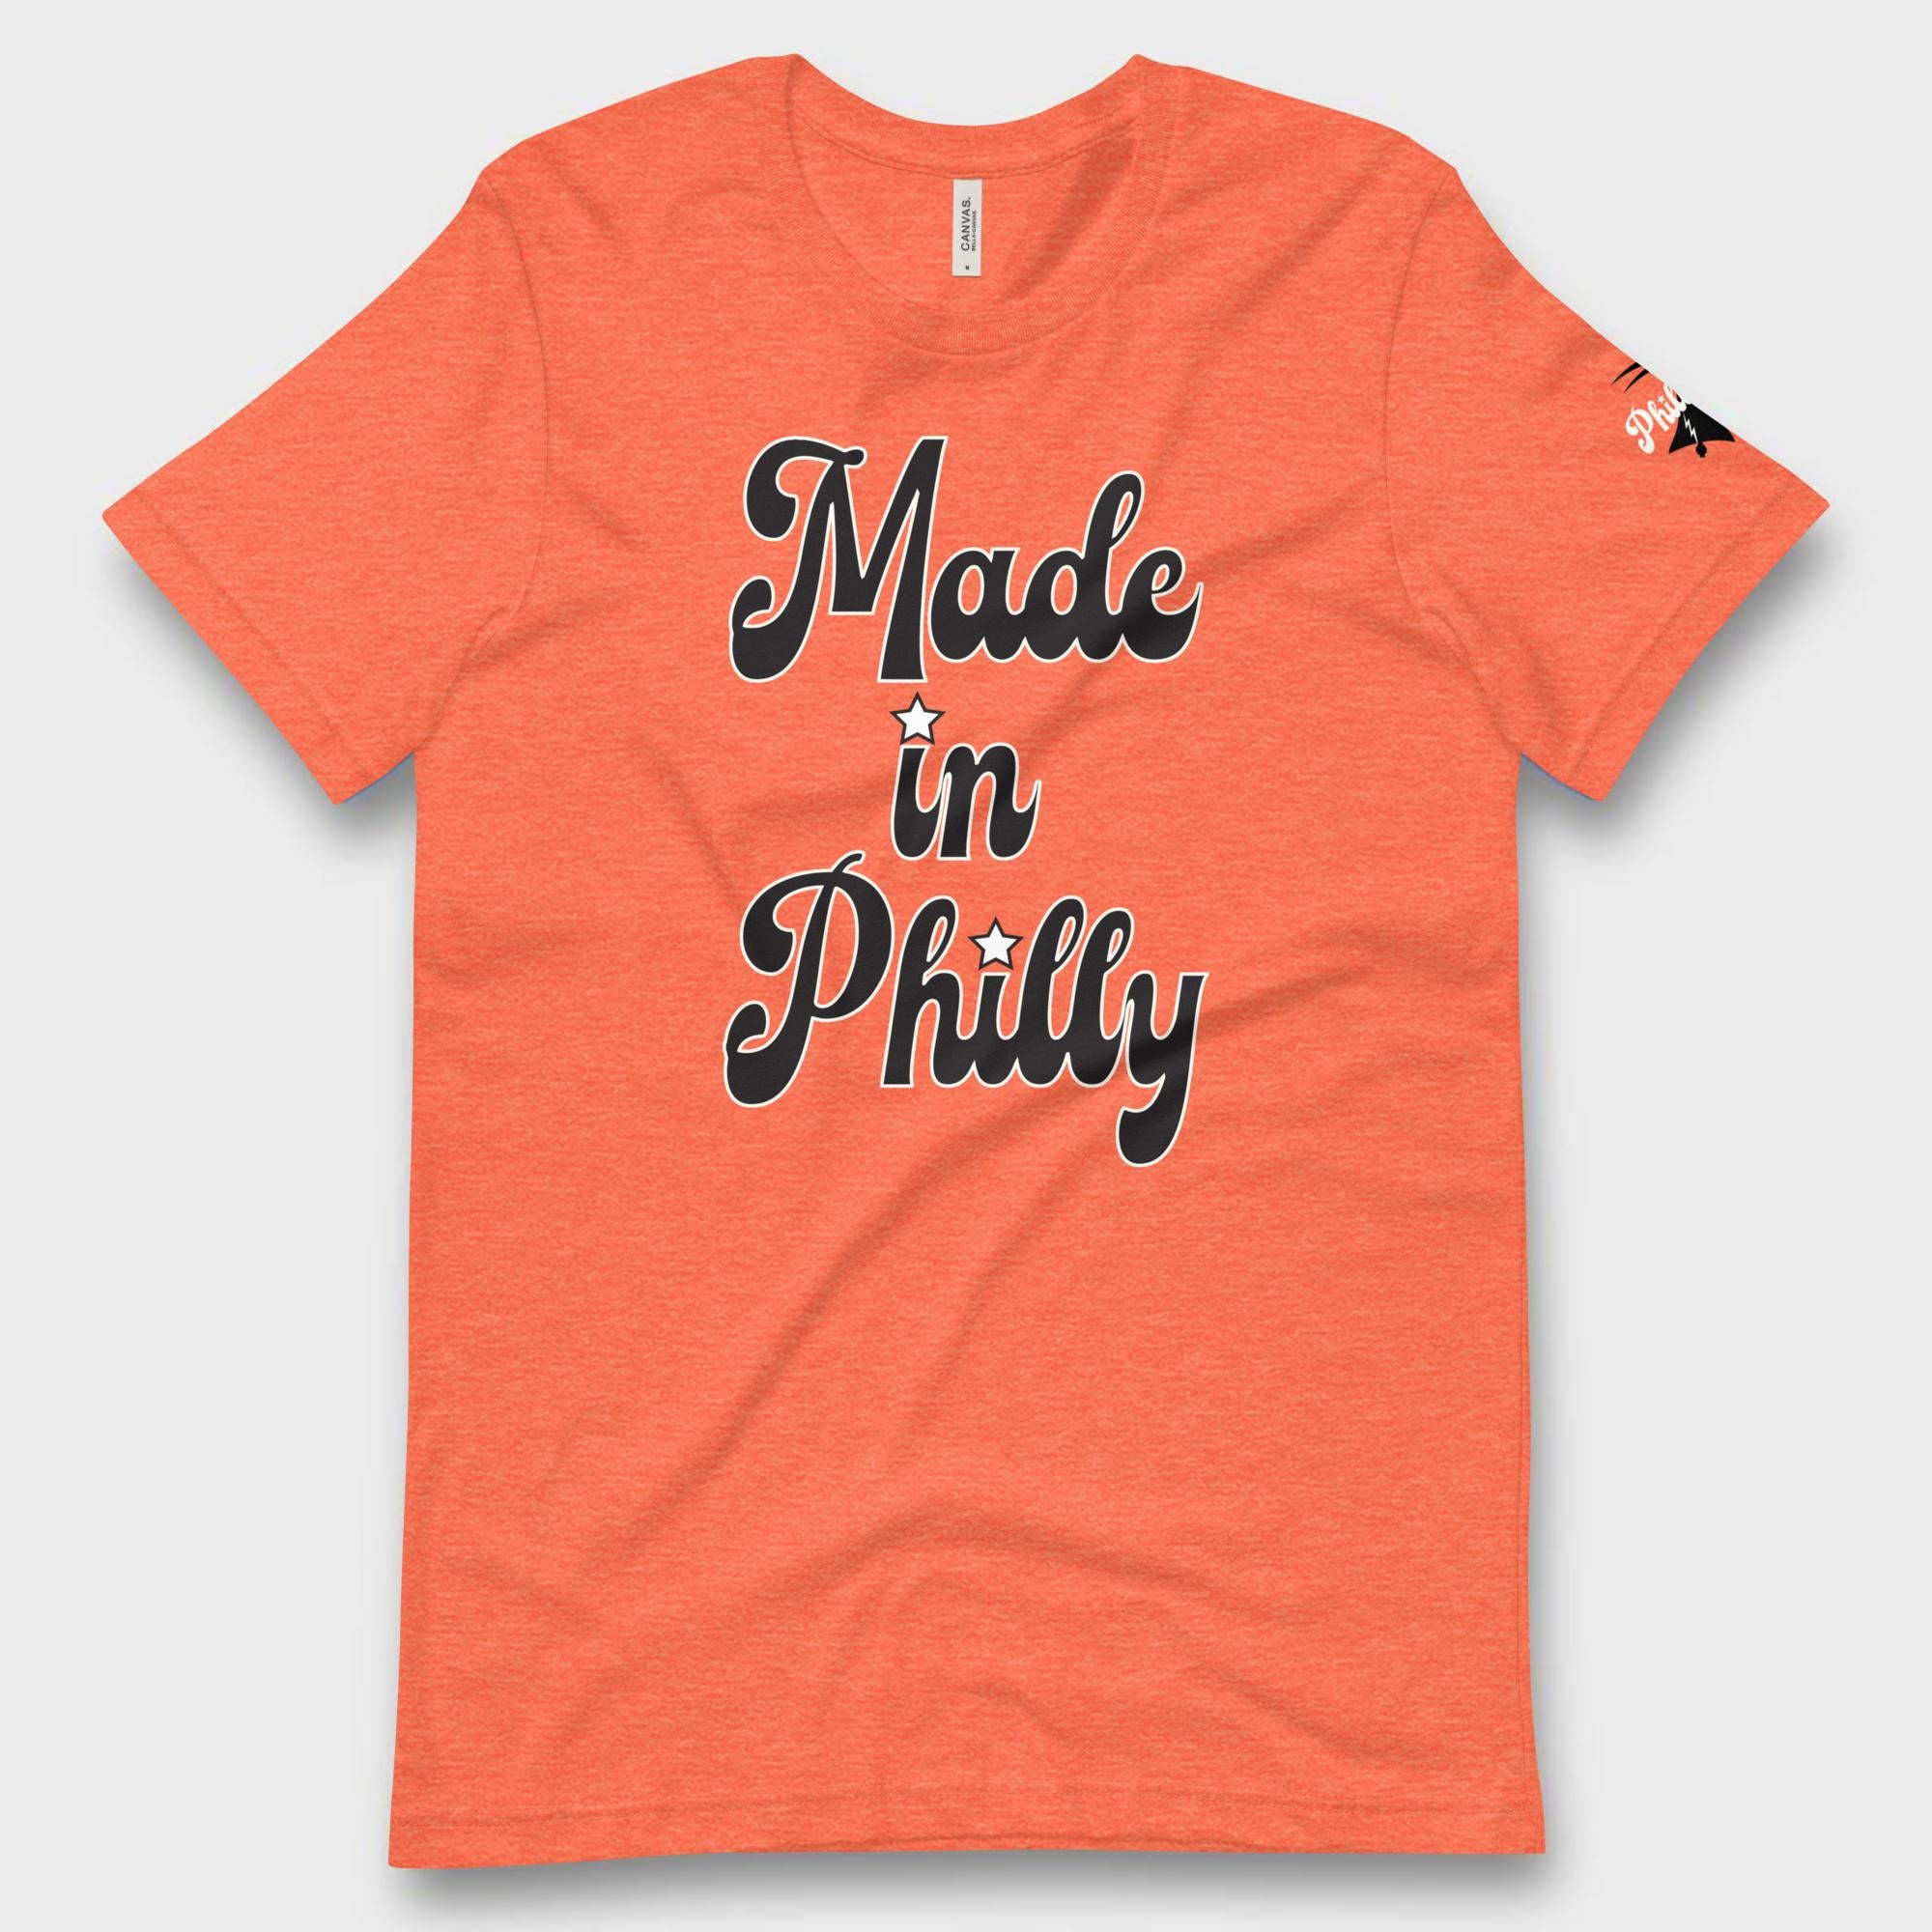 "Made in Philly" Tee